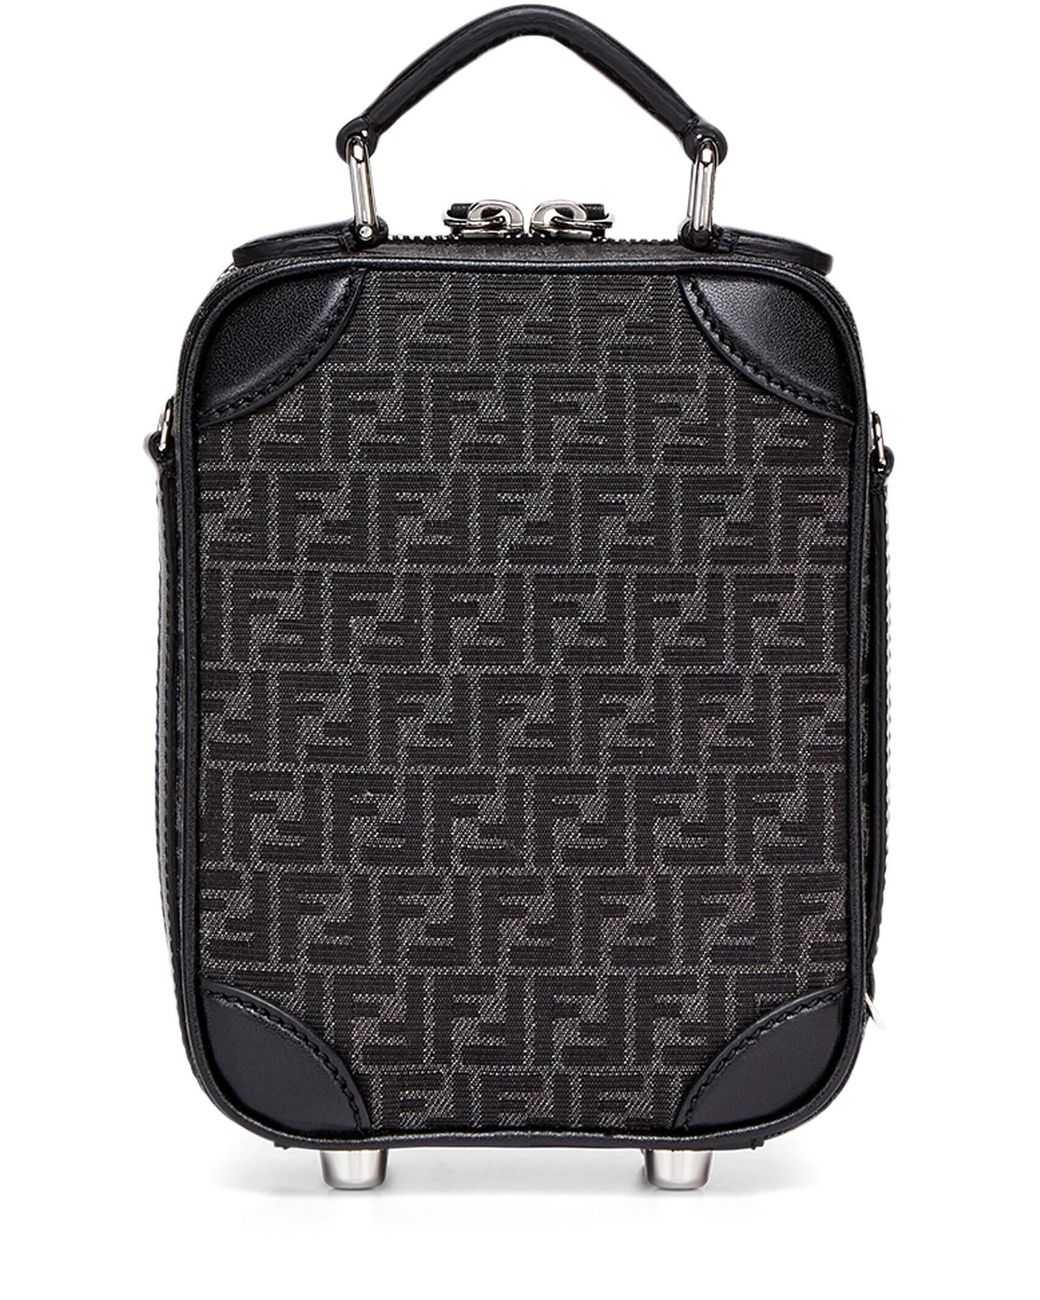 Mens Bags Luggage and suitcases for Men Black Fendi Leather Ff Jacquard Fabric Mini Suitcase in Black,Grey 